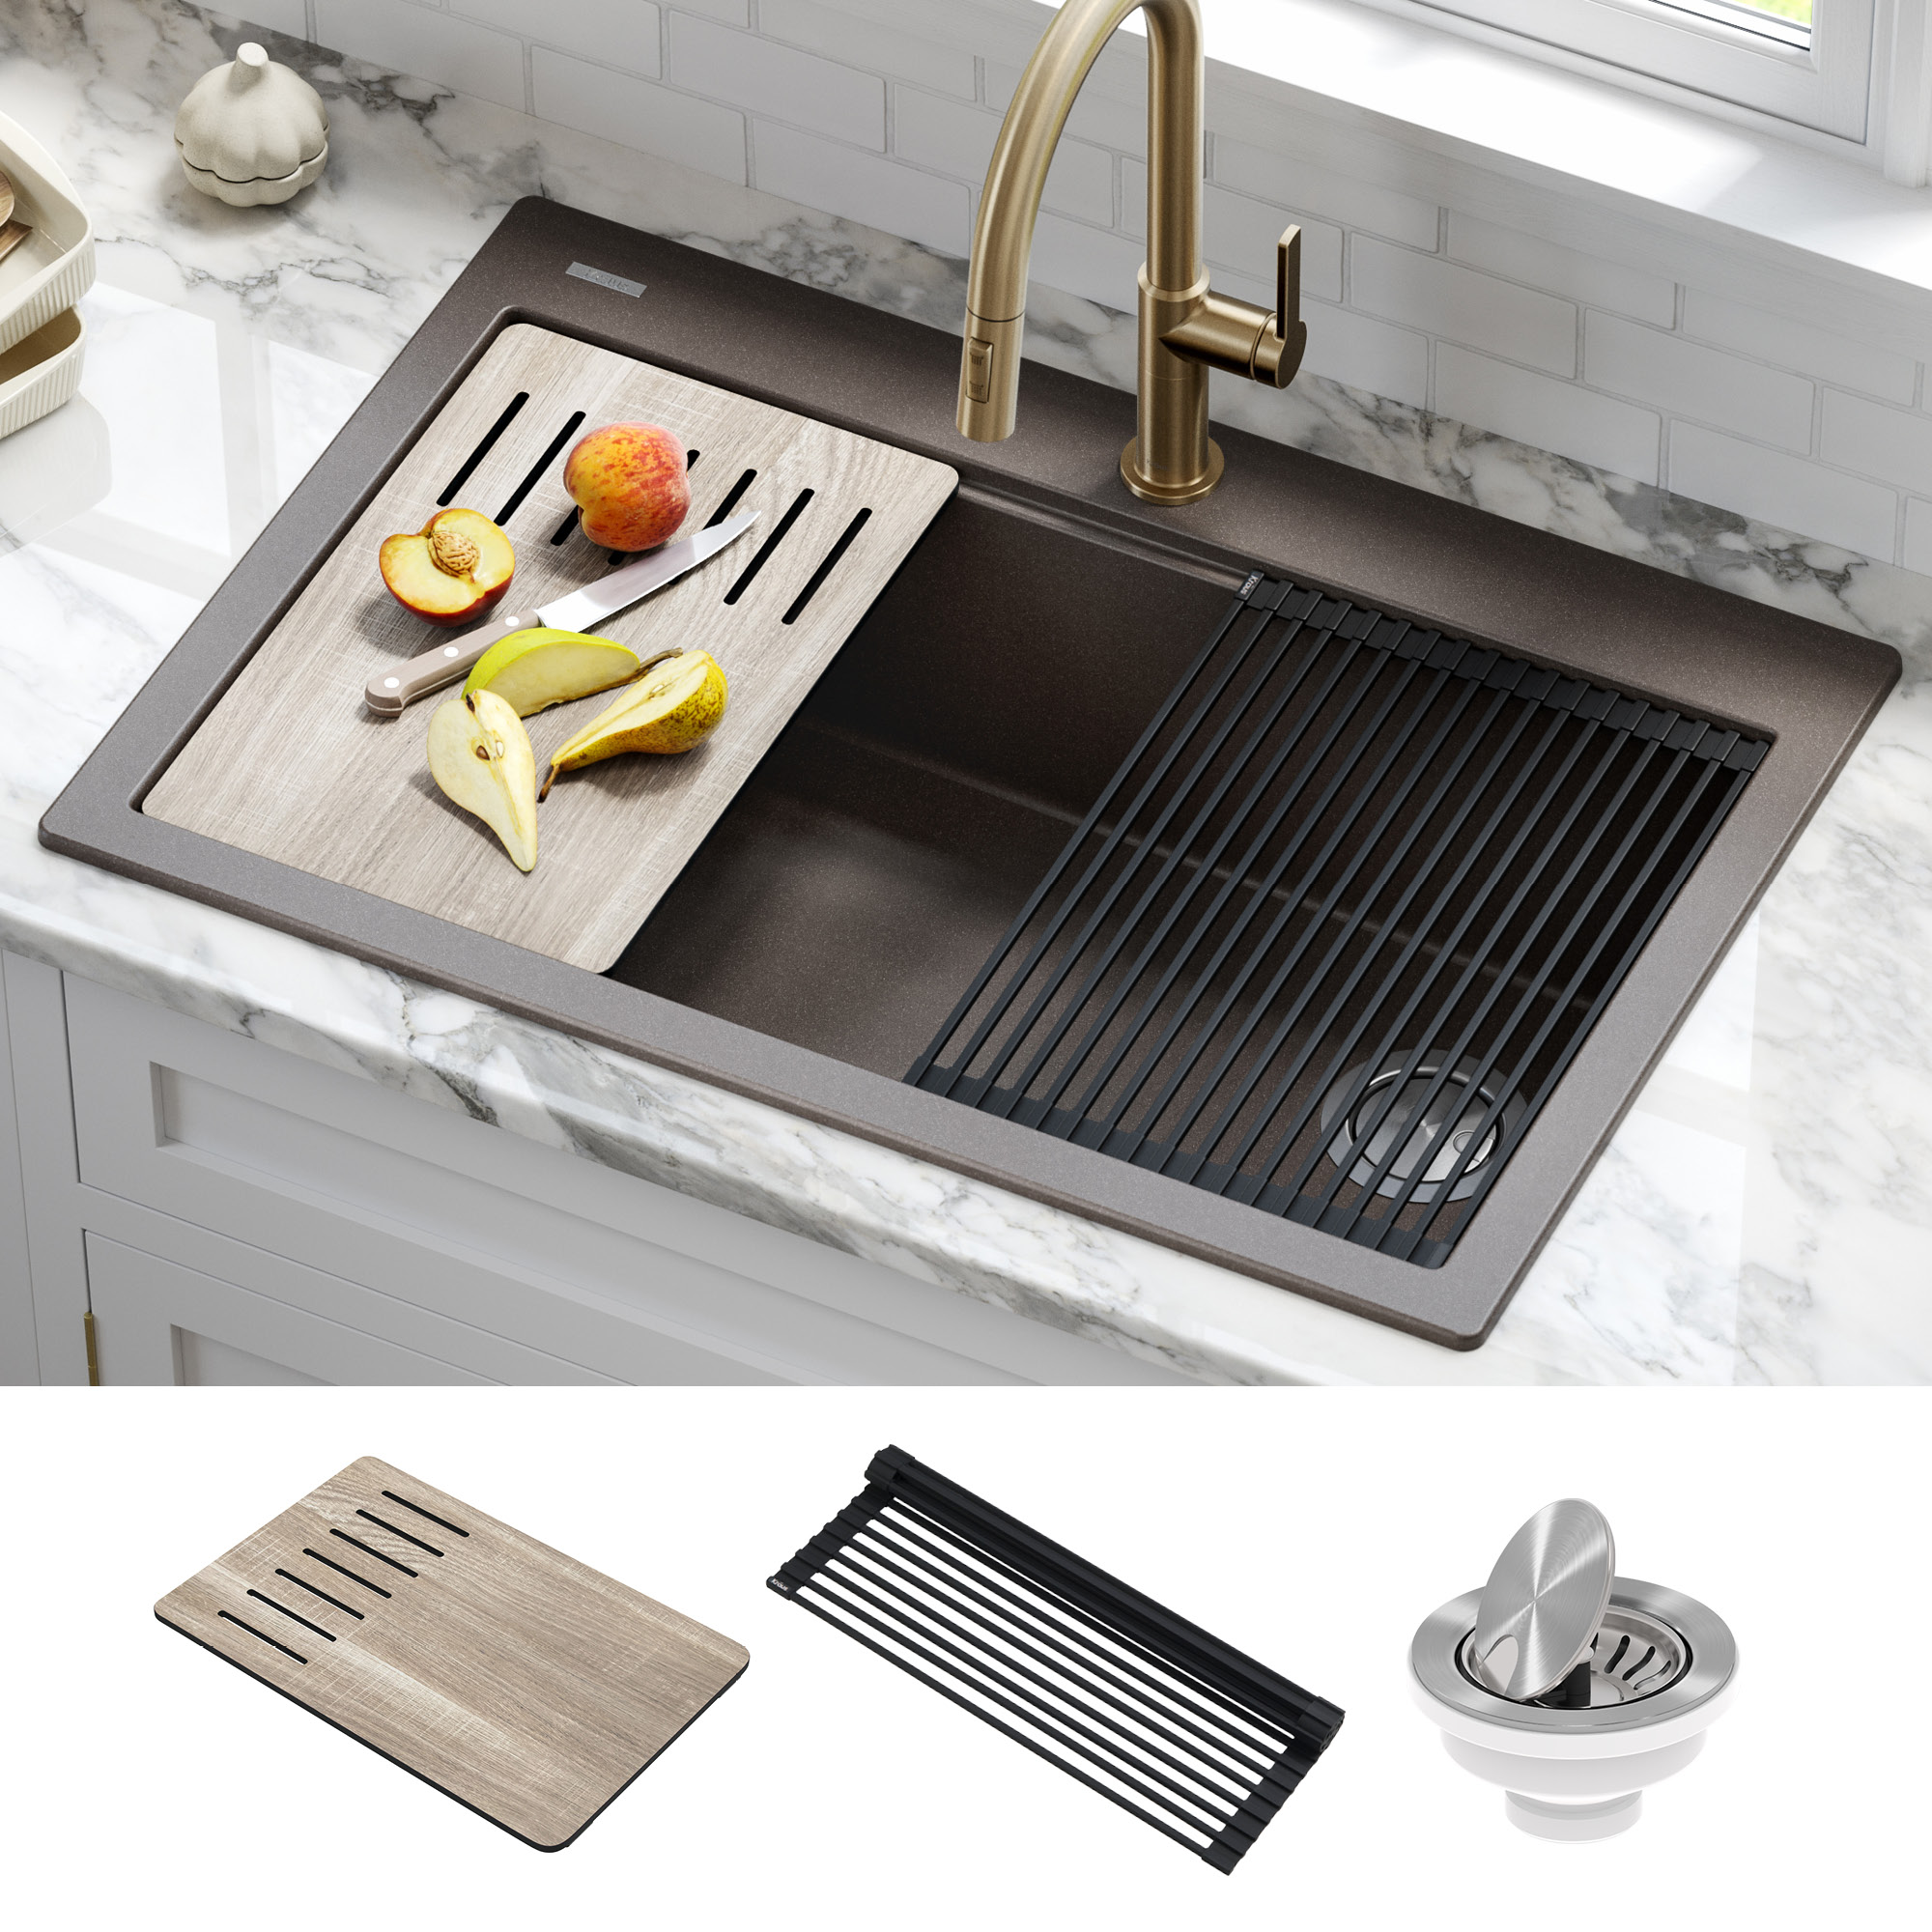 Kraus Bellucci Workstation 33 inch Drop-In Granite Composite Single Bowl Kitchen Sink in Metallic Brown with Accessories - image 1 of 13